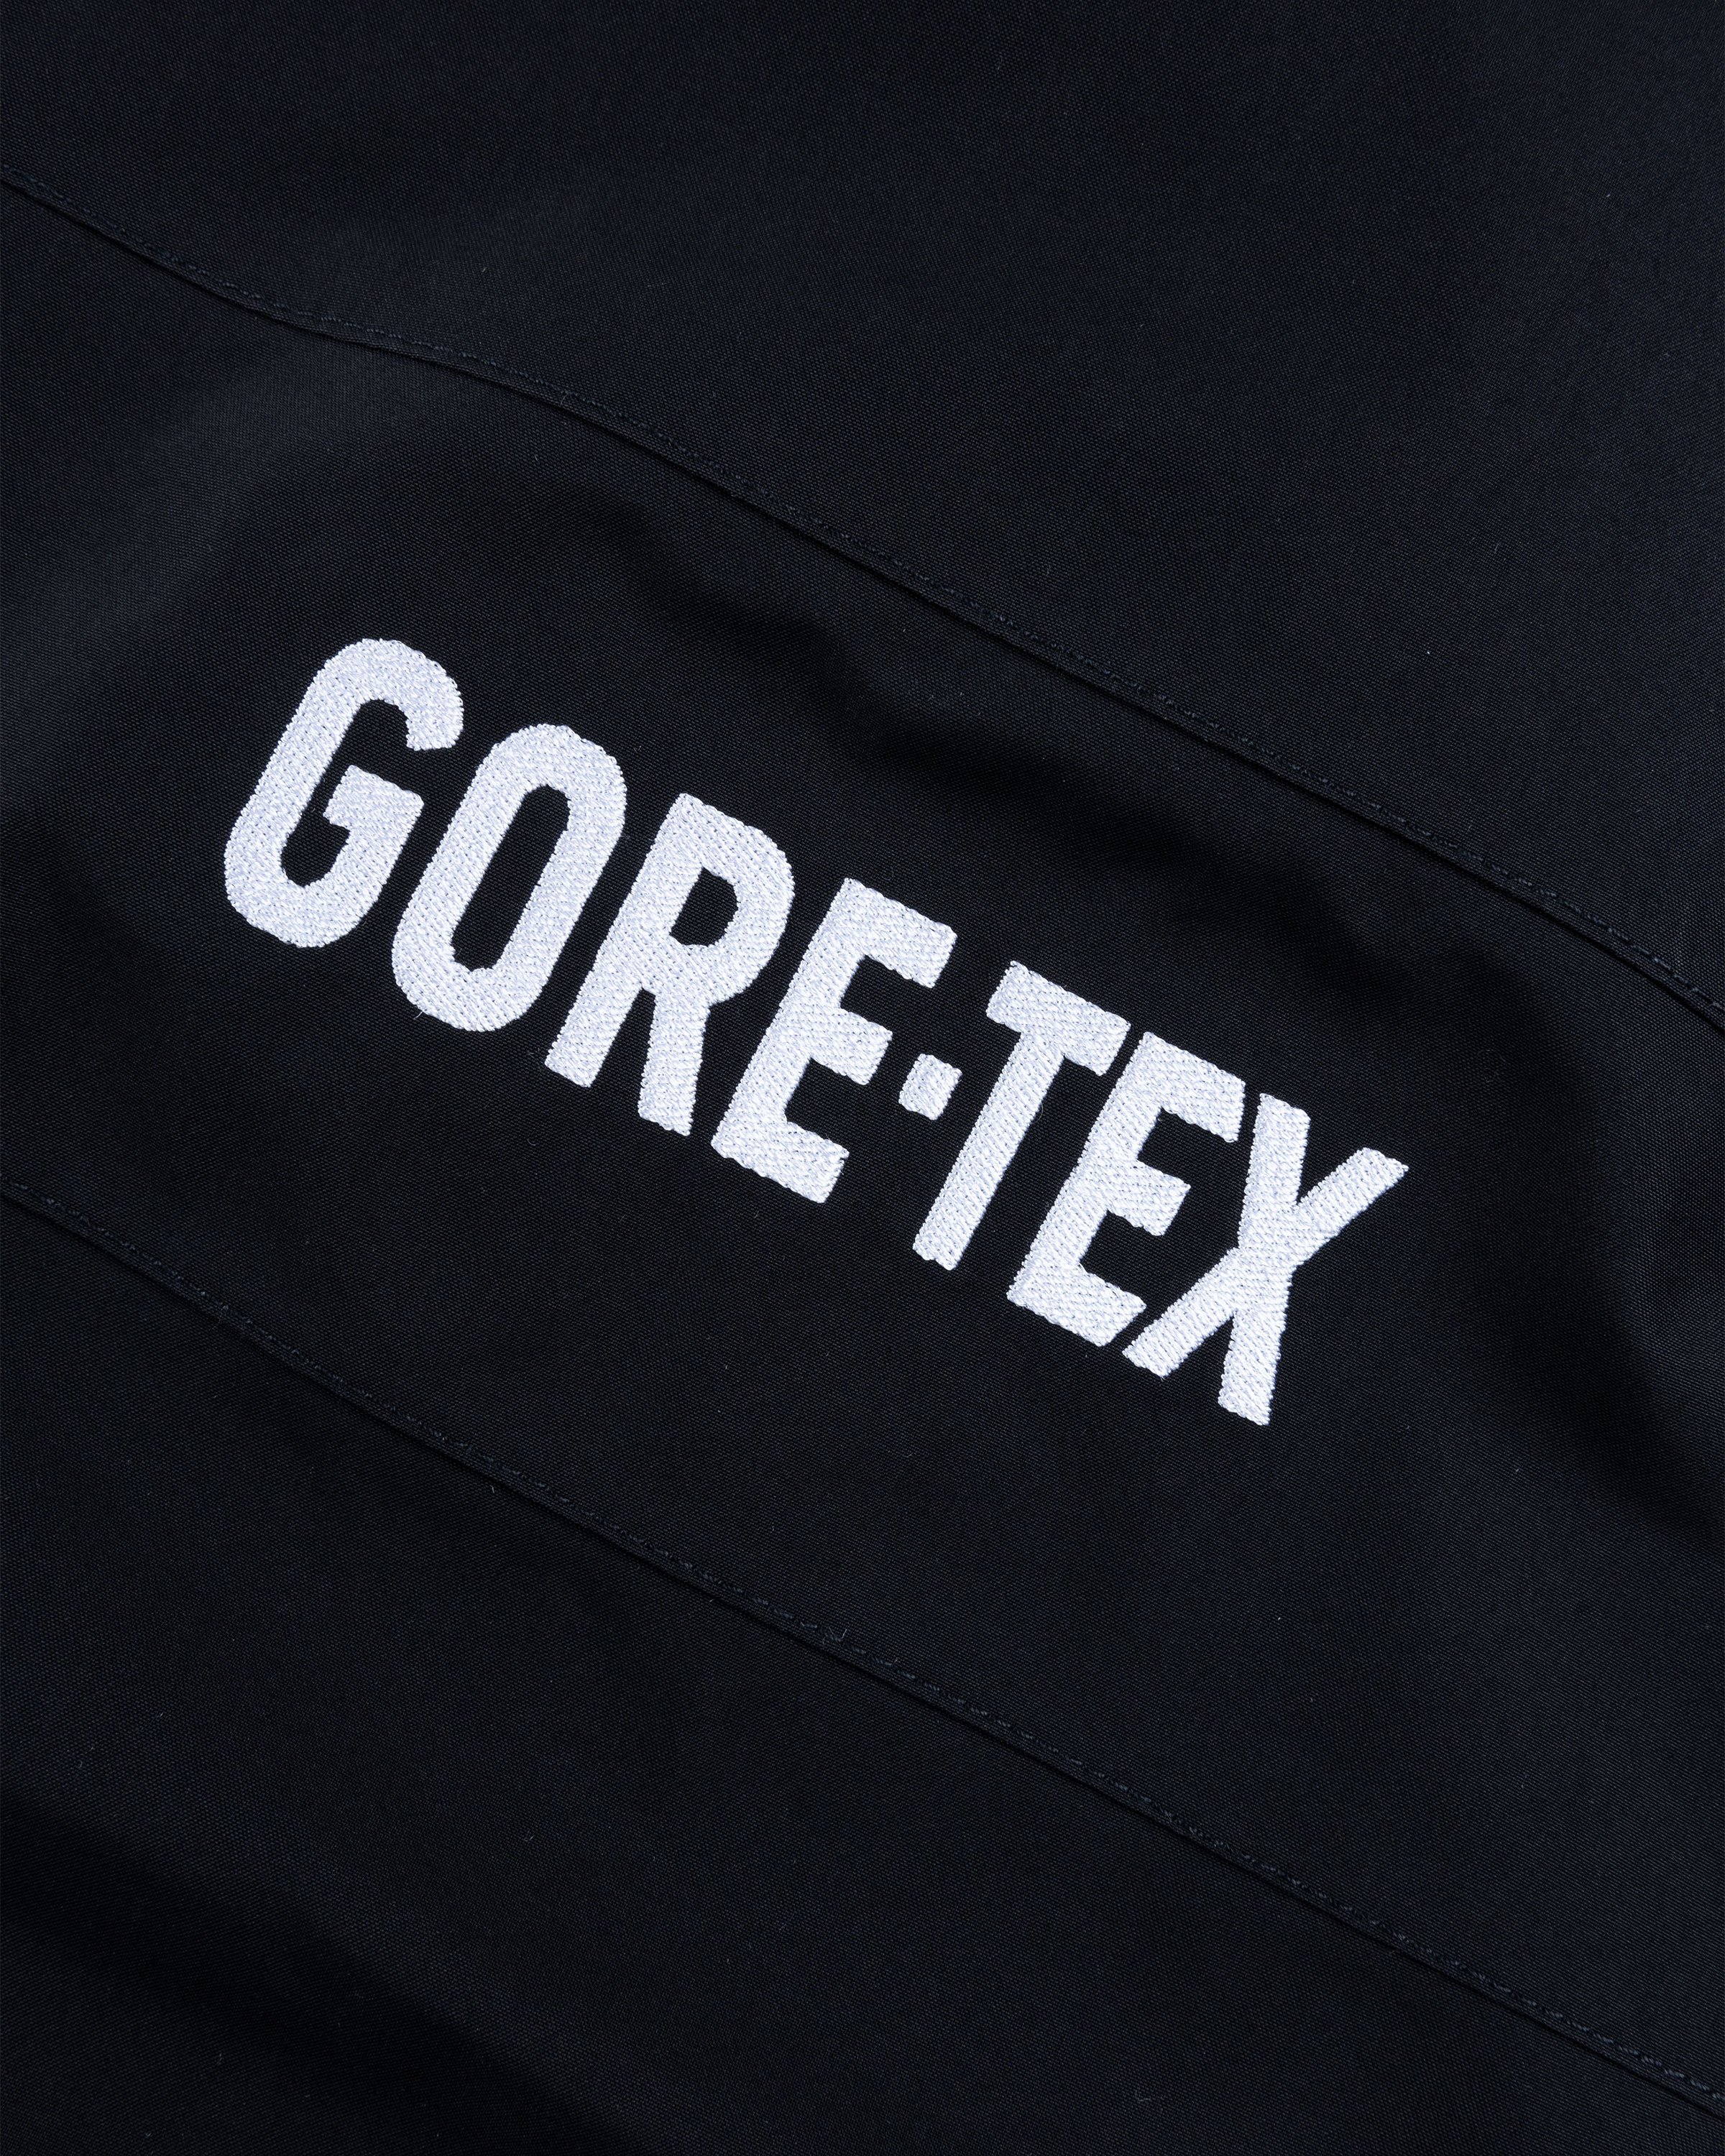 The North Face - GORE-TEX Mountain Pants Black - Clothing - Black - Image 6